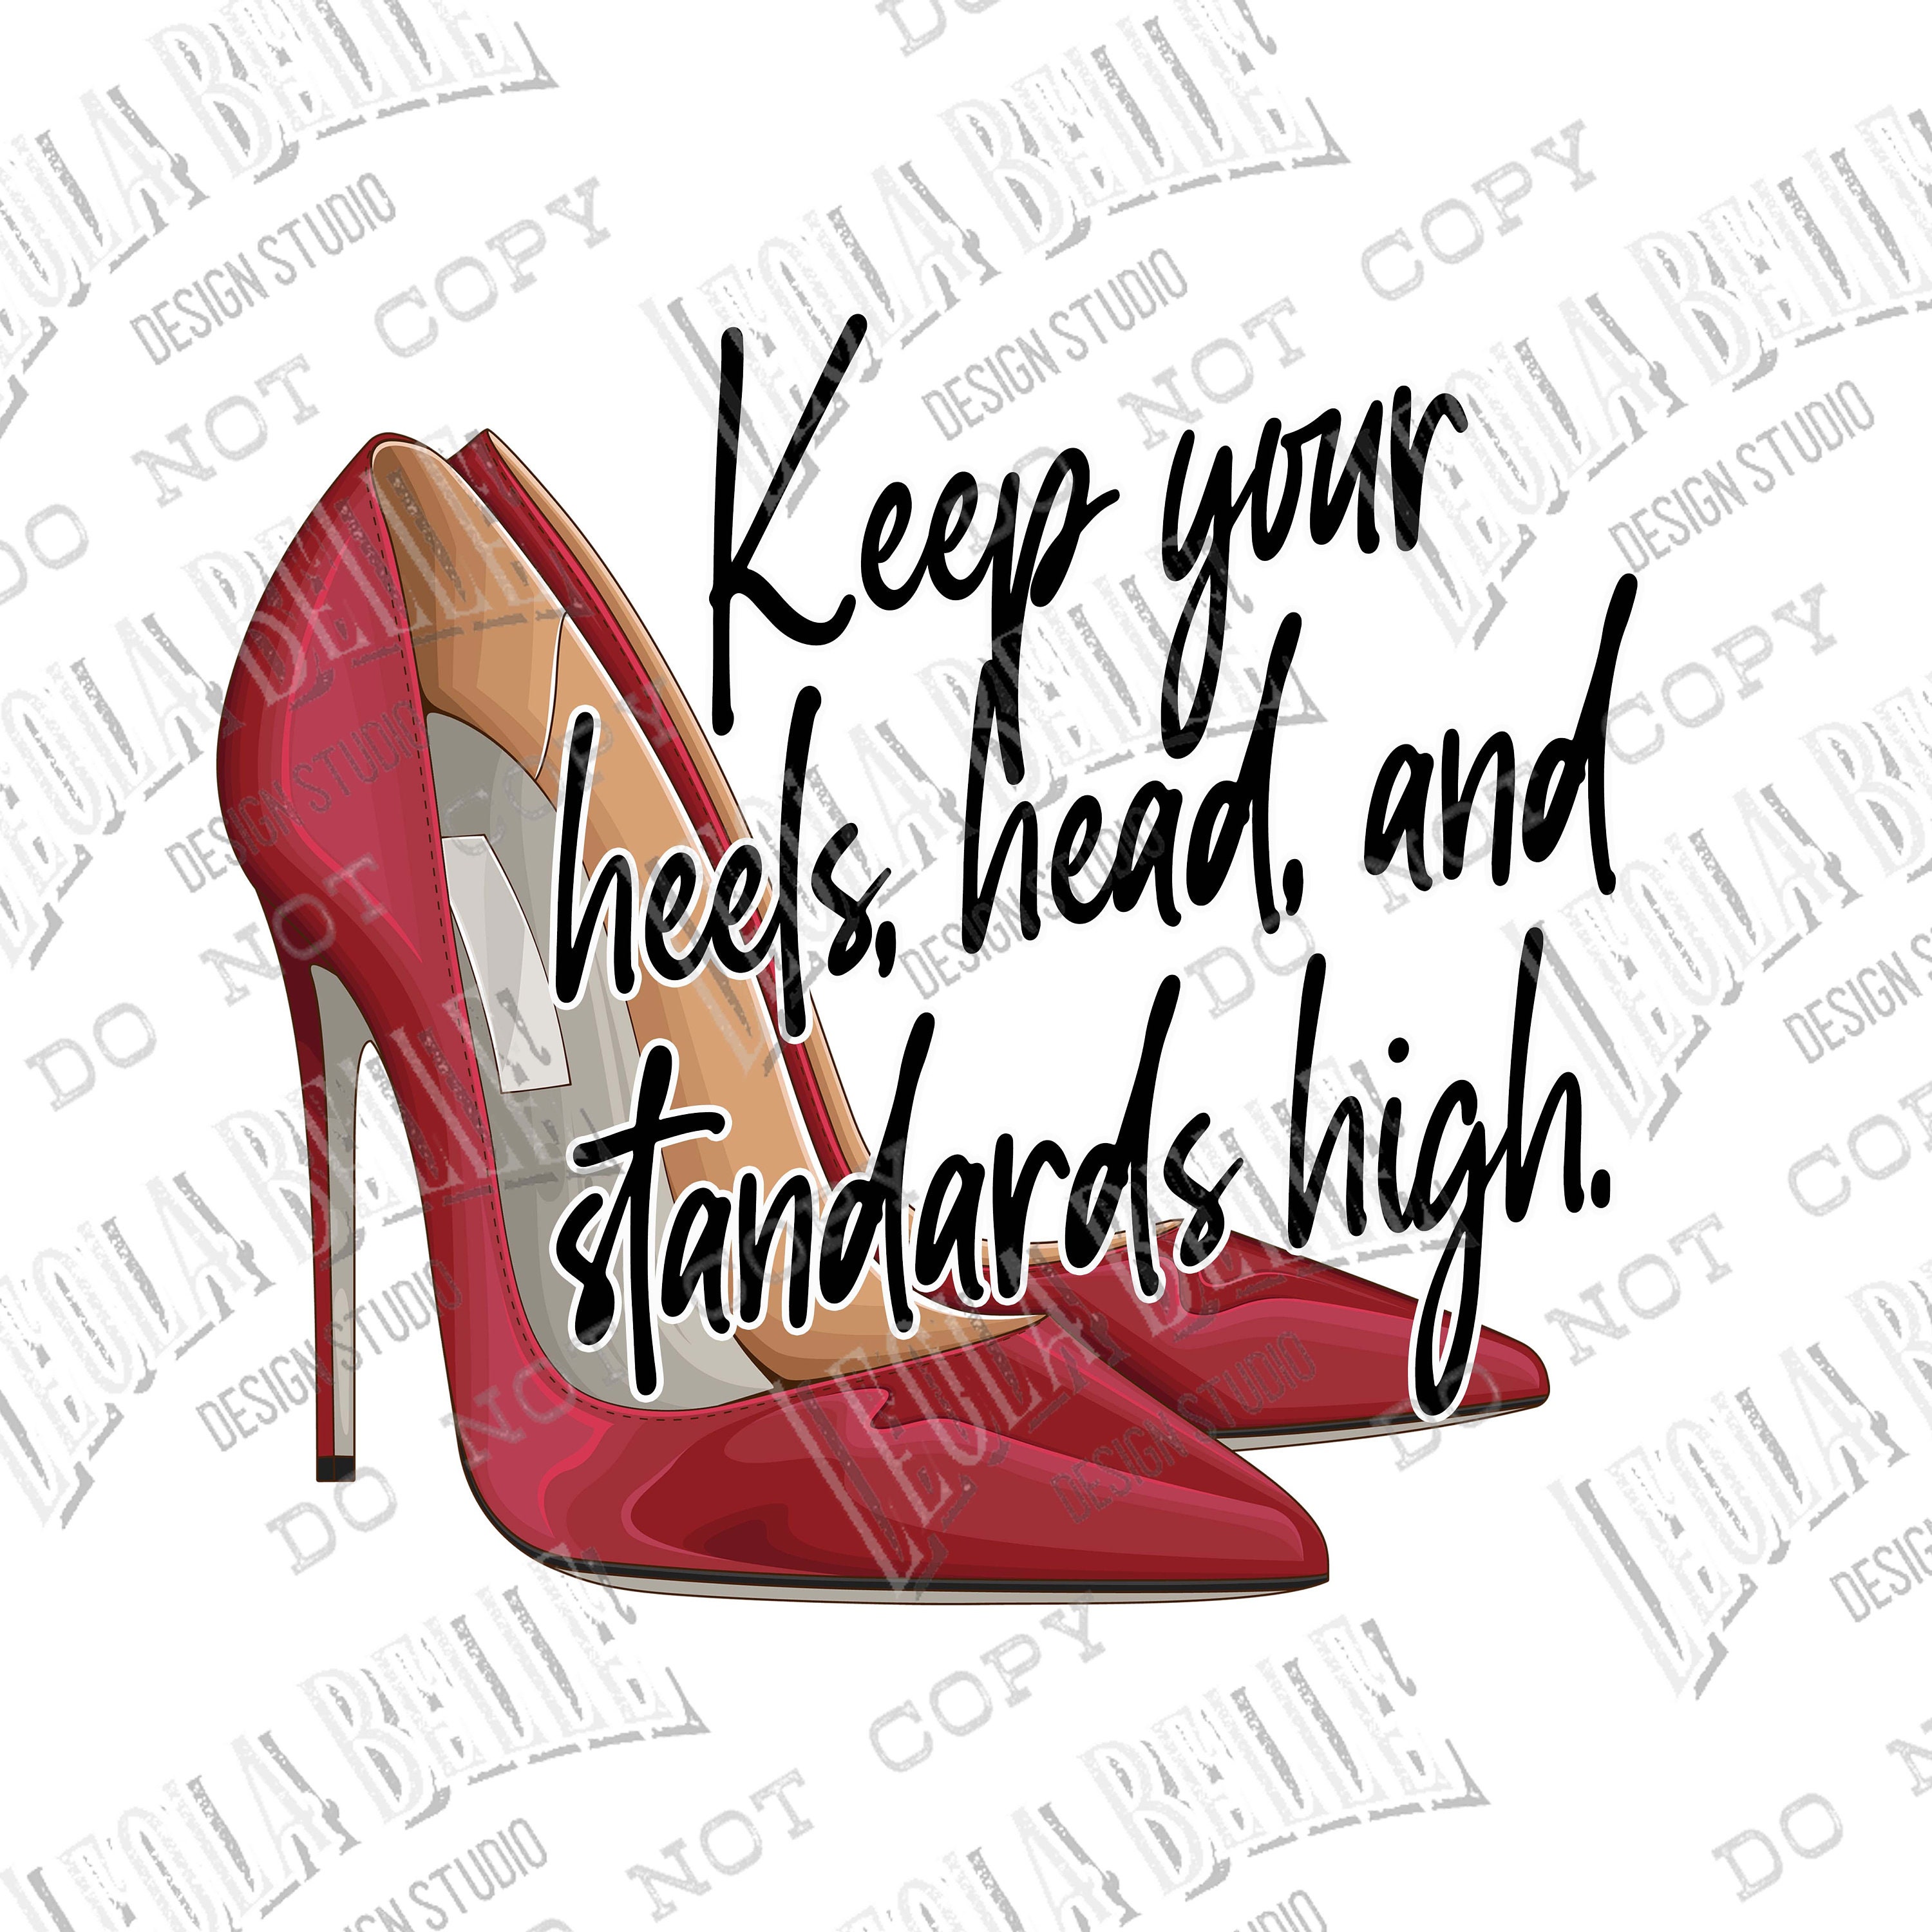 Coco Chanel: “keep your heels, head and standards high”. Me: Always. |  Instagram